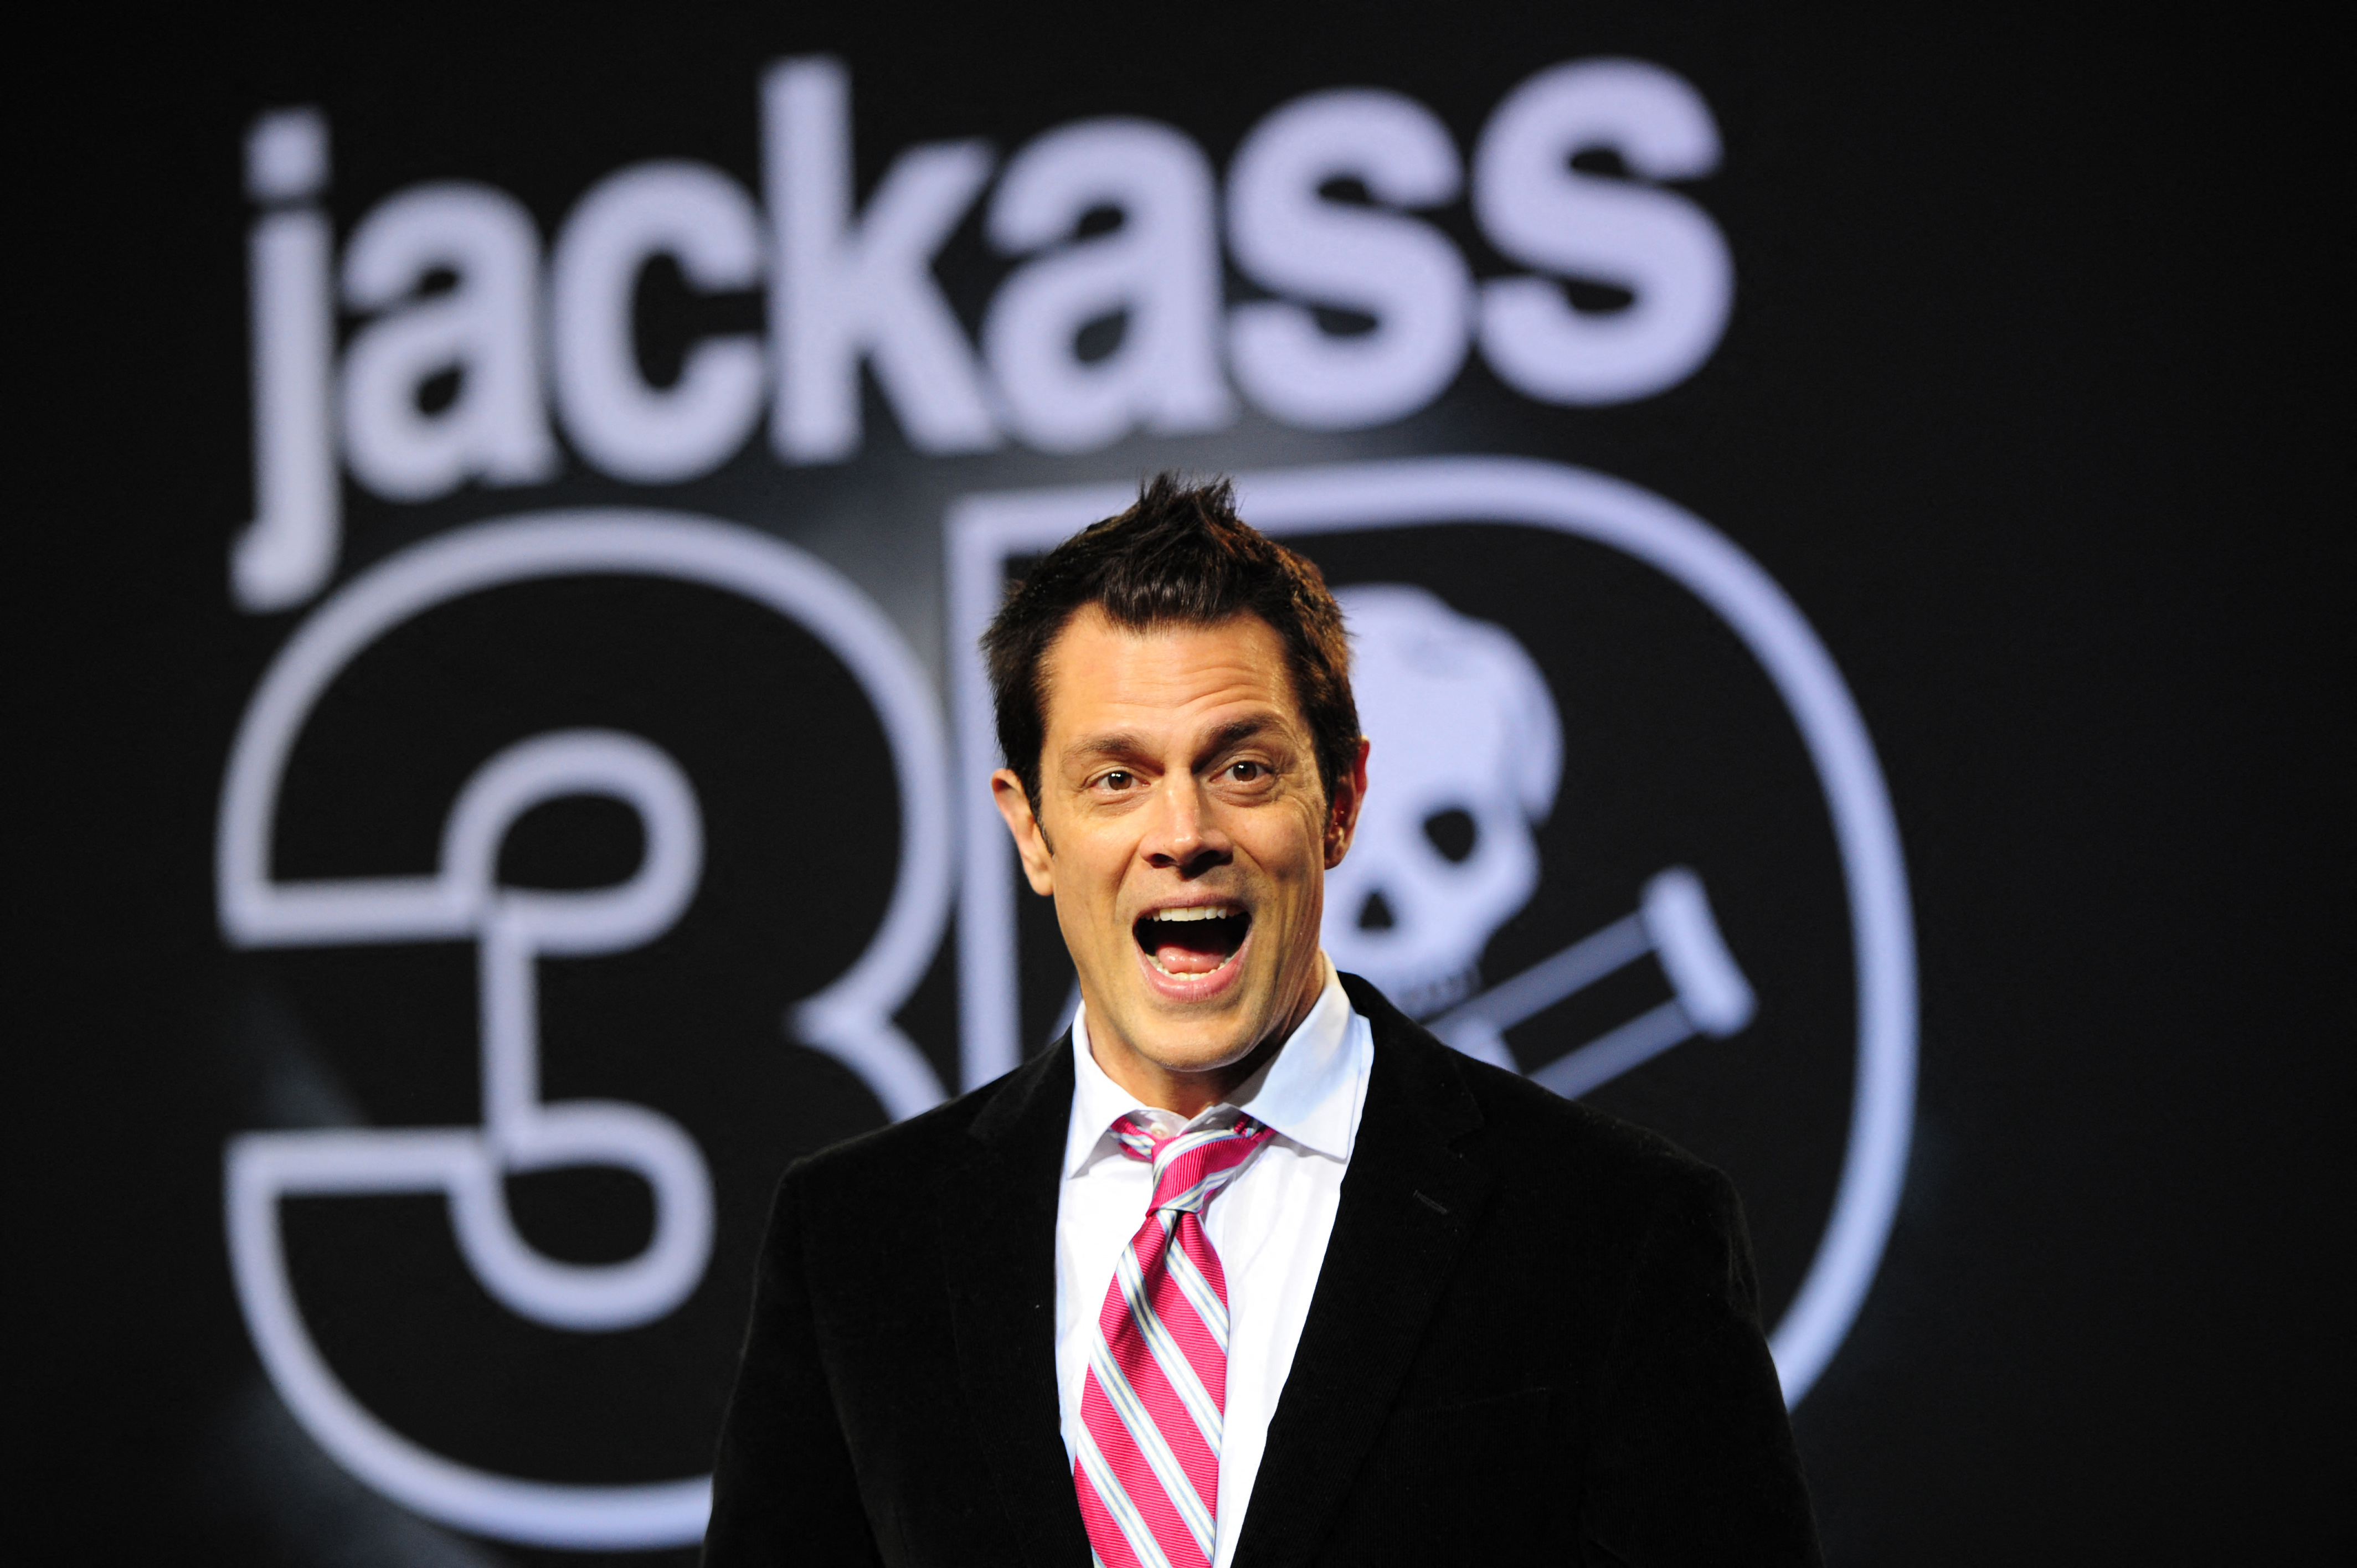 Jackass Johnny Knoxville